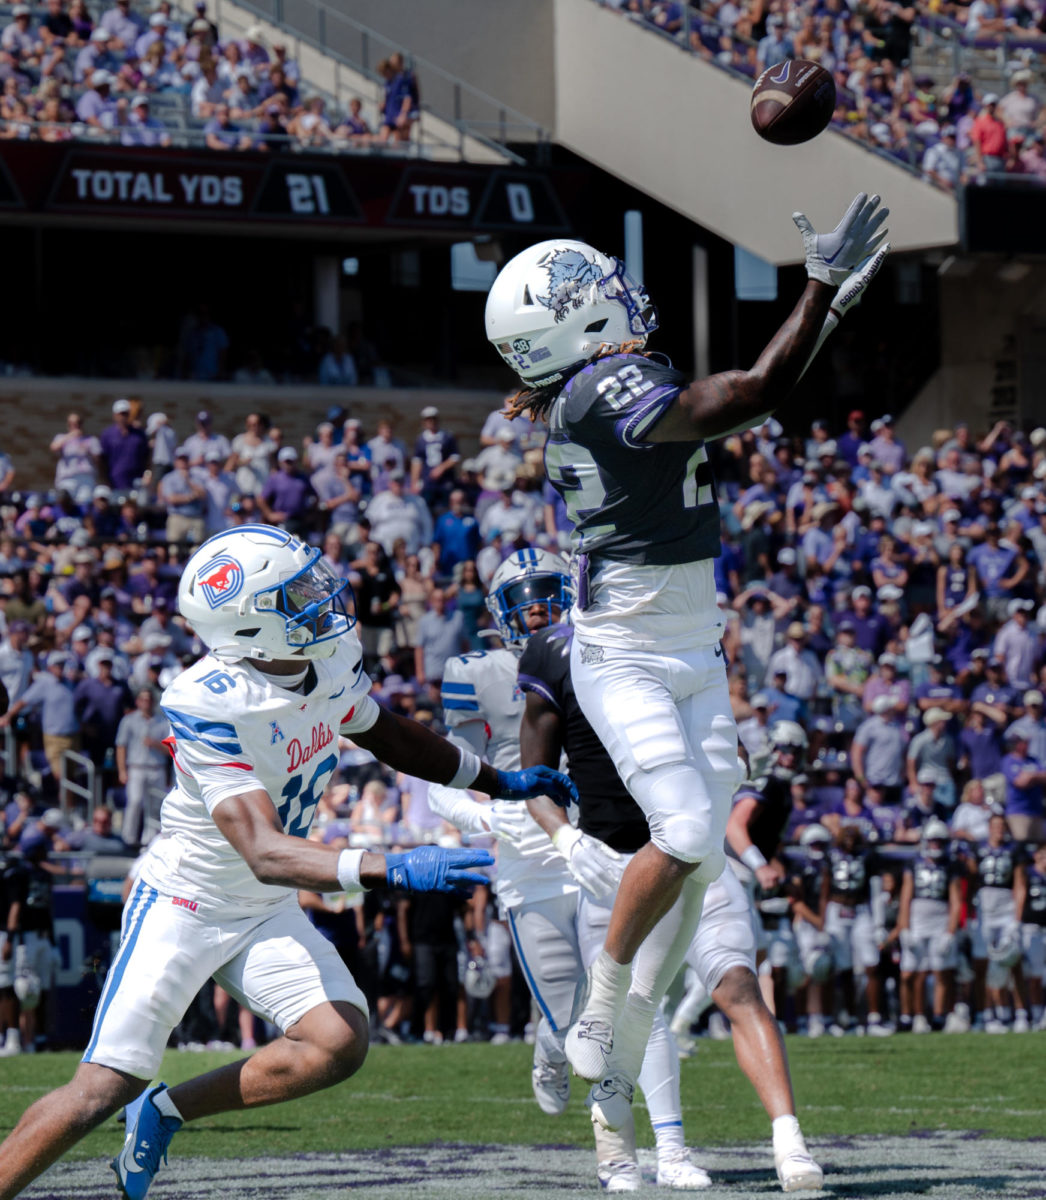 Texas Christian University wide receiver Major Everhart receives a pass at Amon G. Carter Stadium in Fort Worth, Texas, Sept. 23, 2023. The TCU Horned Frogs beat the SMU Mustangs 34-17. (TCU 360/Shane Manson)